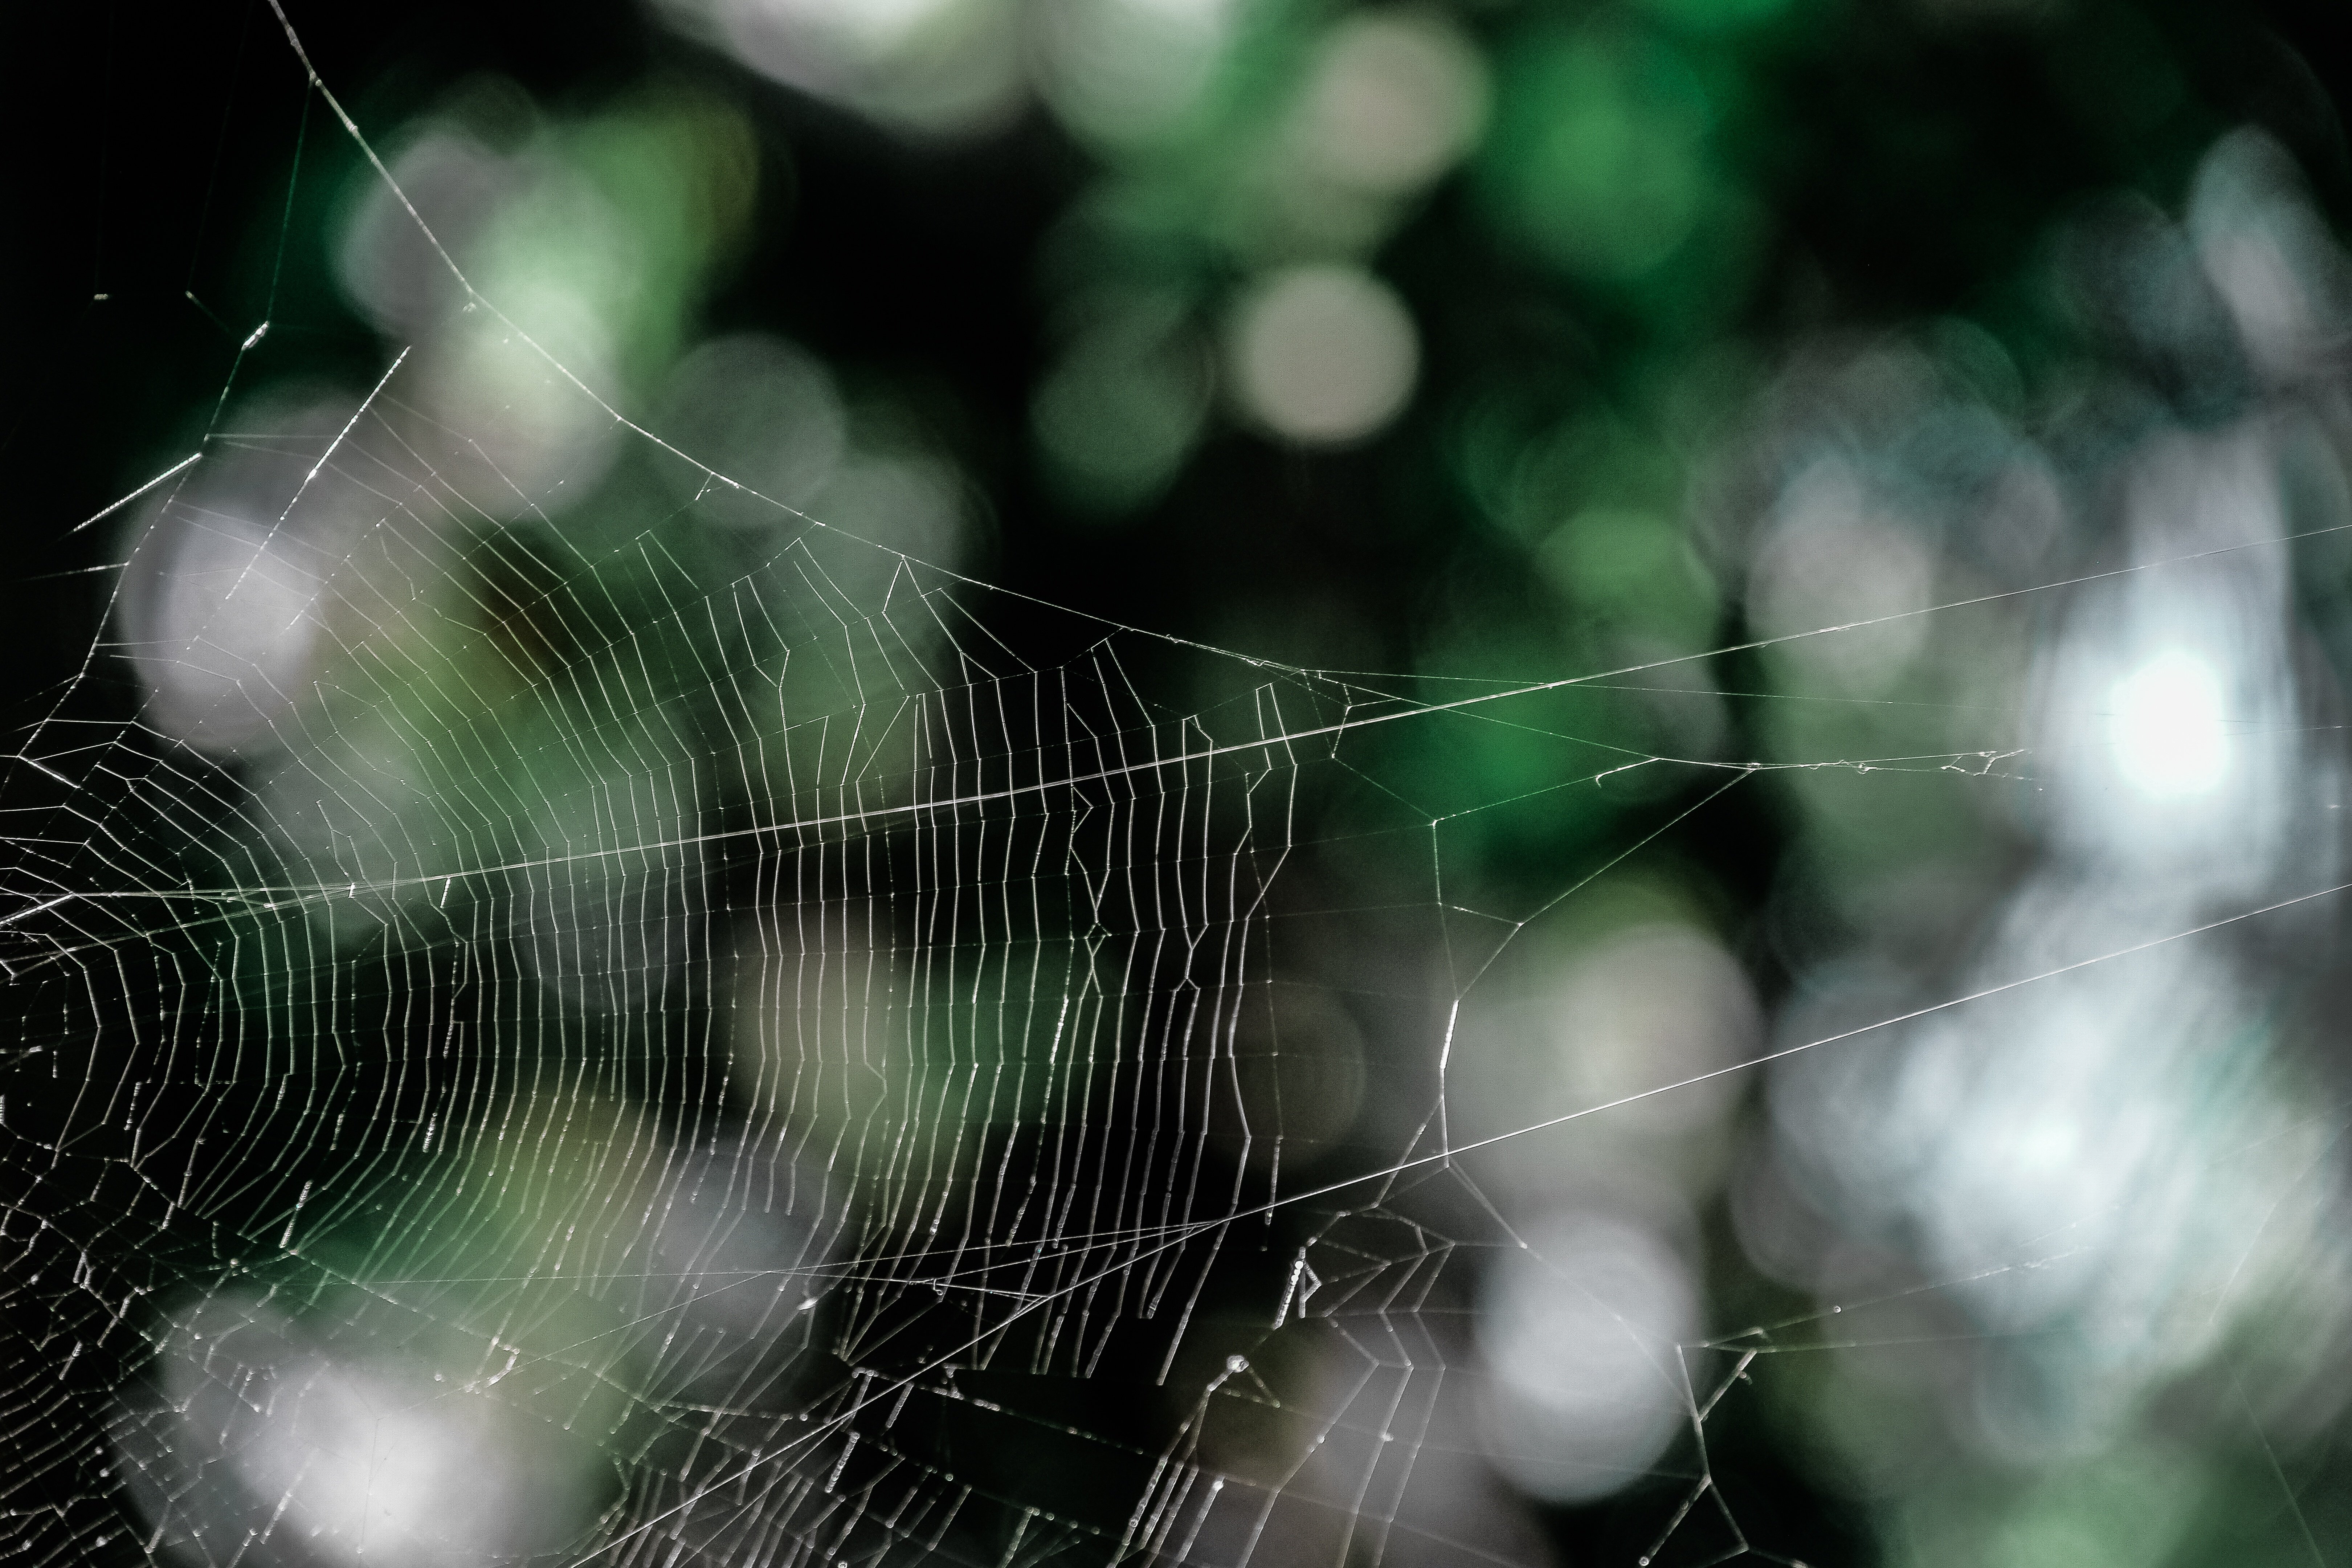 spiders web in front of blurred background to highlight the intricacies of a b2b content marketing strategyspiders web in front of blurred background to highlight the intricacies of a b2b content marketing strategy